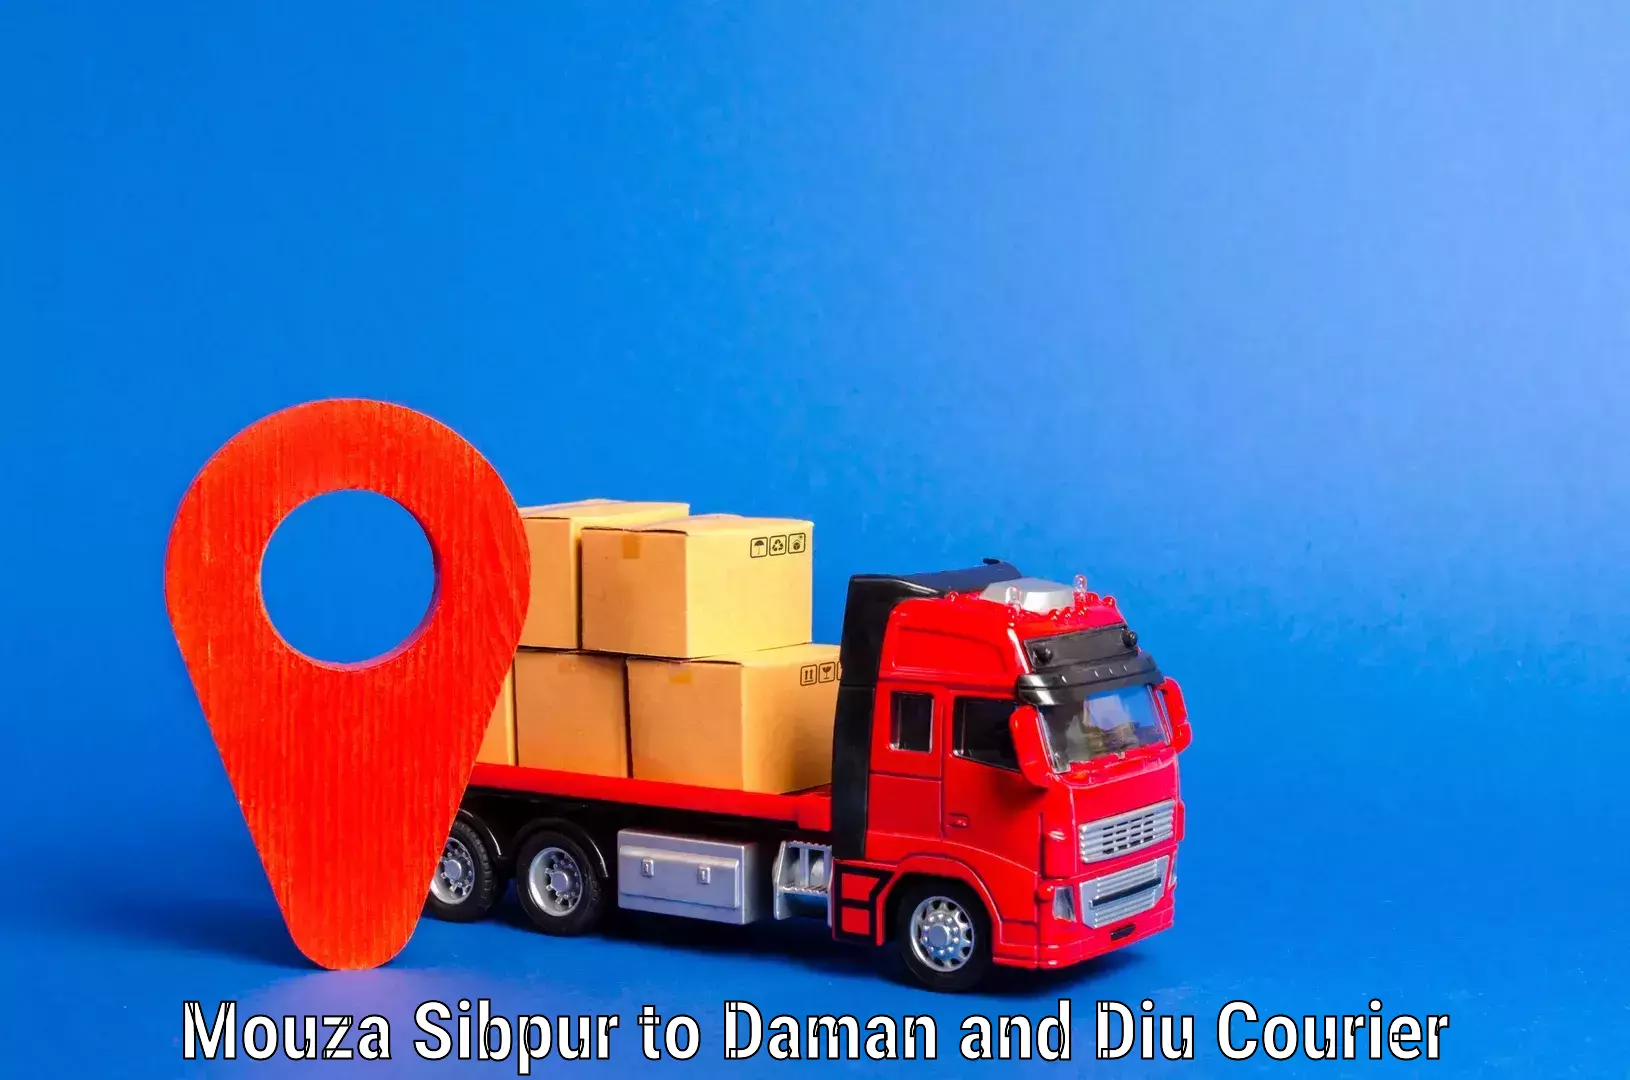 Budget-friendly movers Mouza Sibpur to Daman and Diu